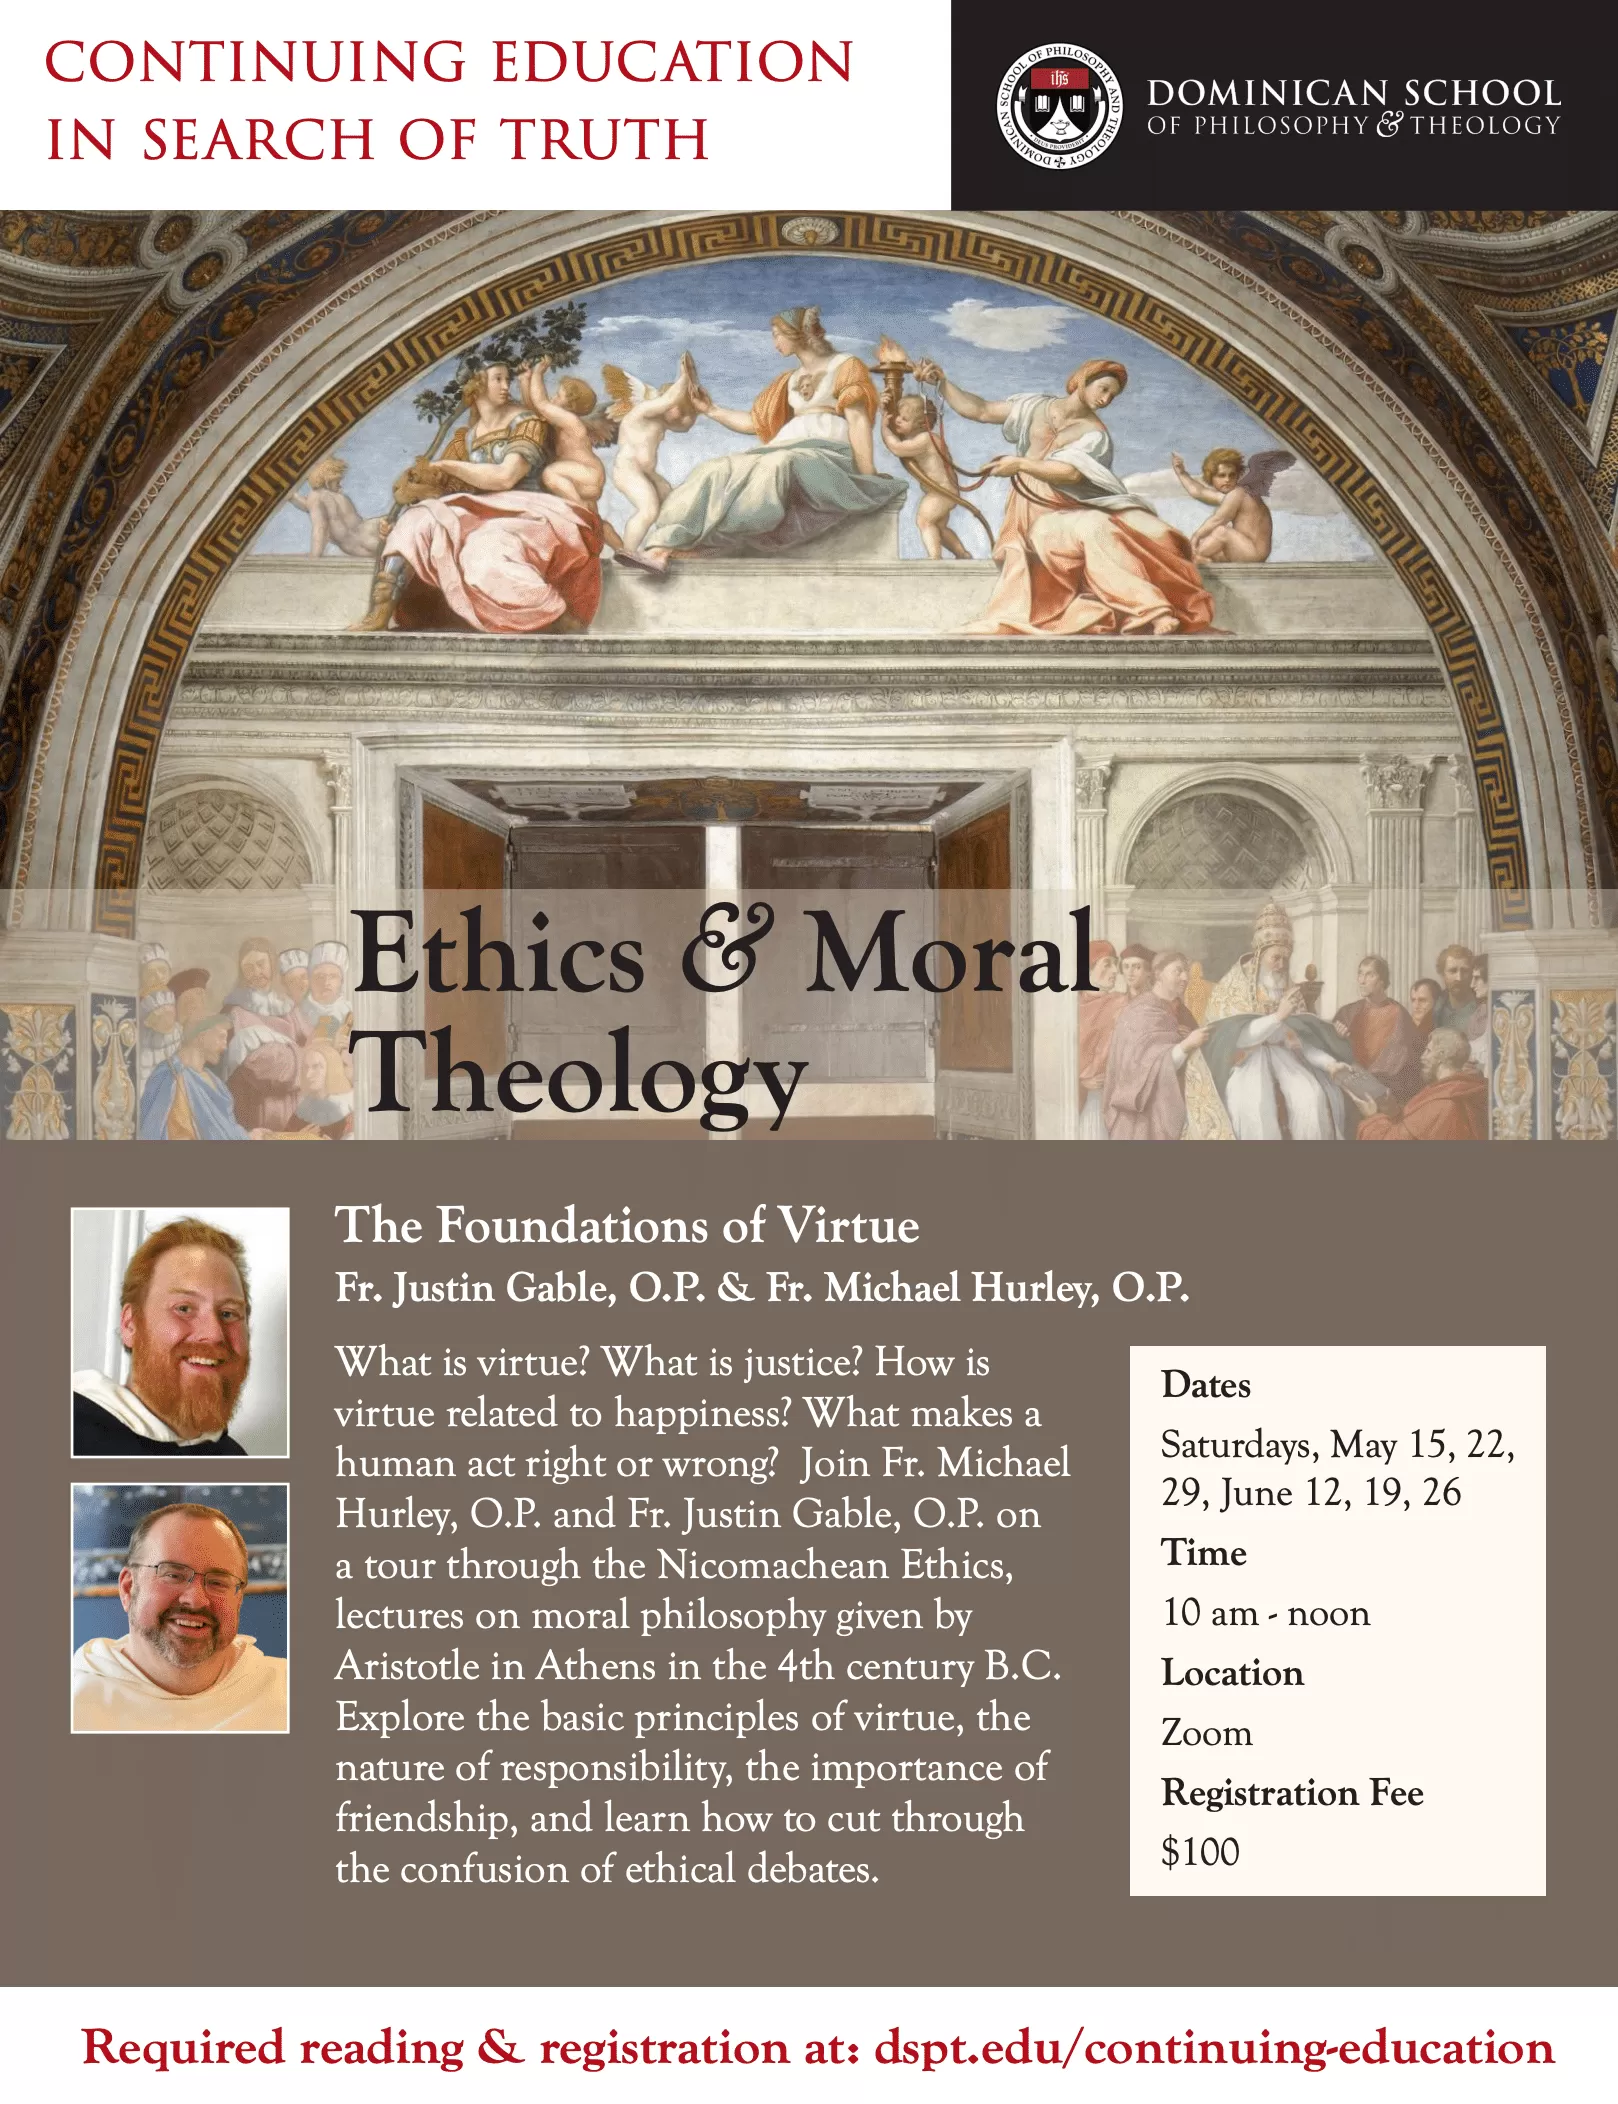 DSPT Presents: Ethics & Moral Theology